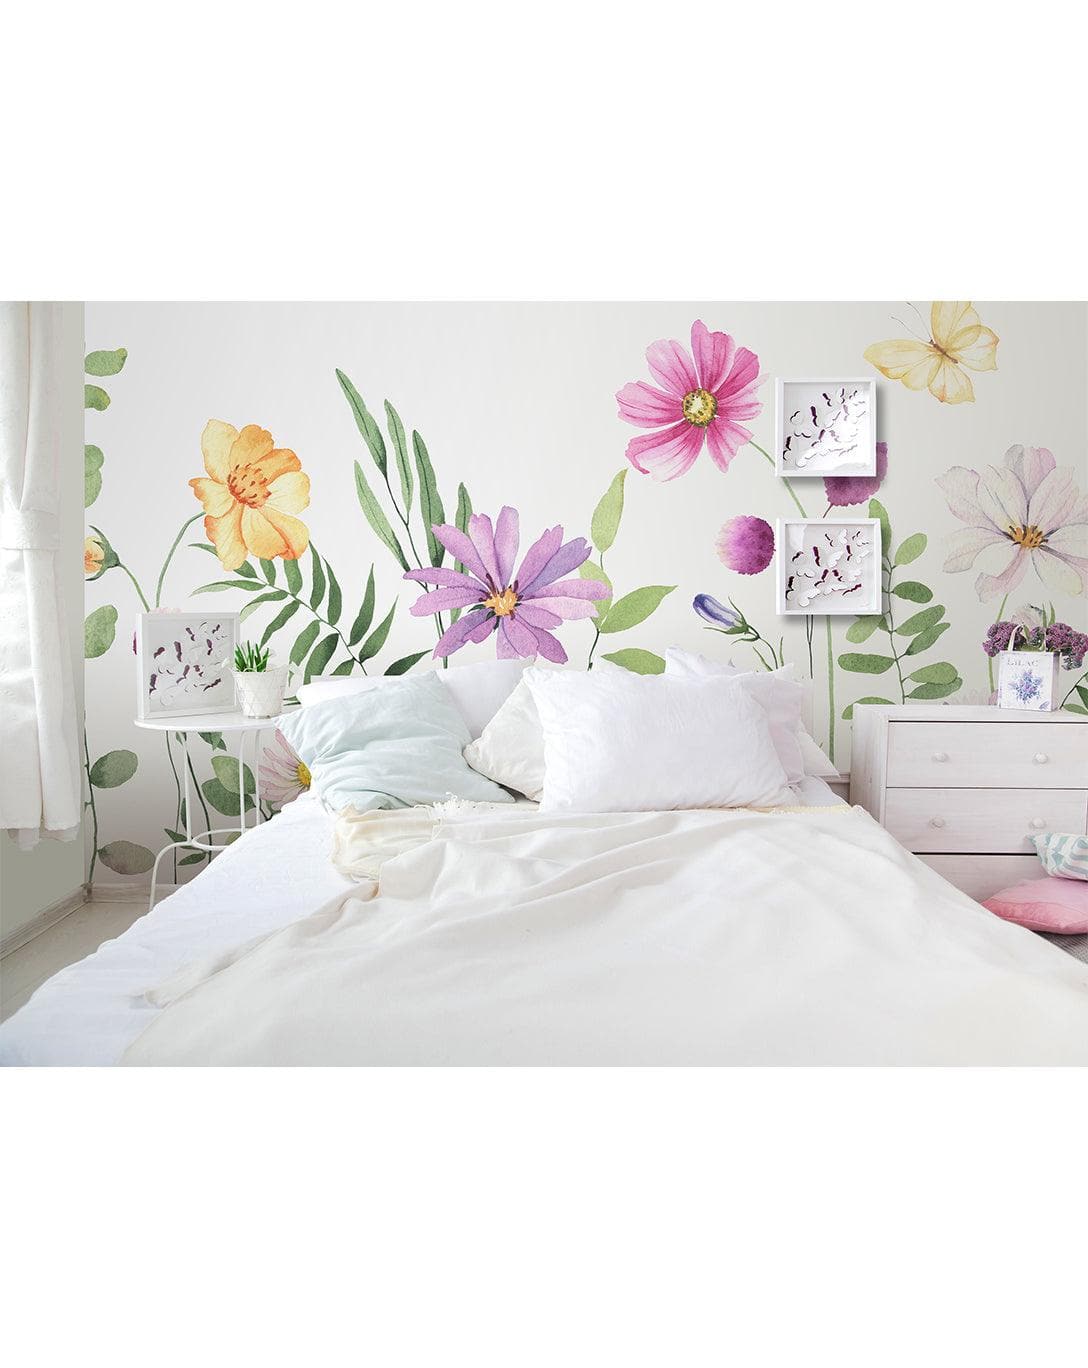 Watercolor Indian Feathers Removable Wallpaper Watercolor Indian Feathers Removable Wallpaper Colorful Wildflowers Watercolor Wall Mural 